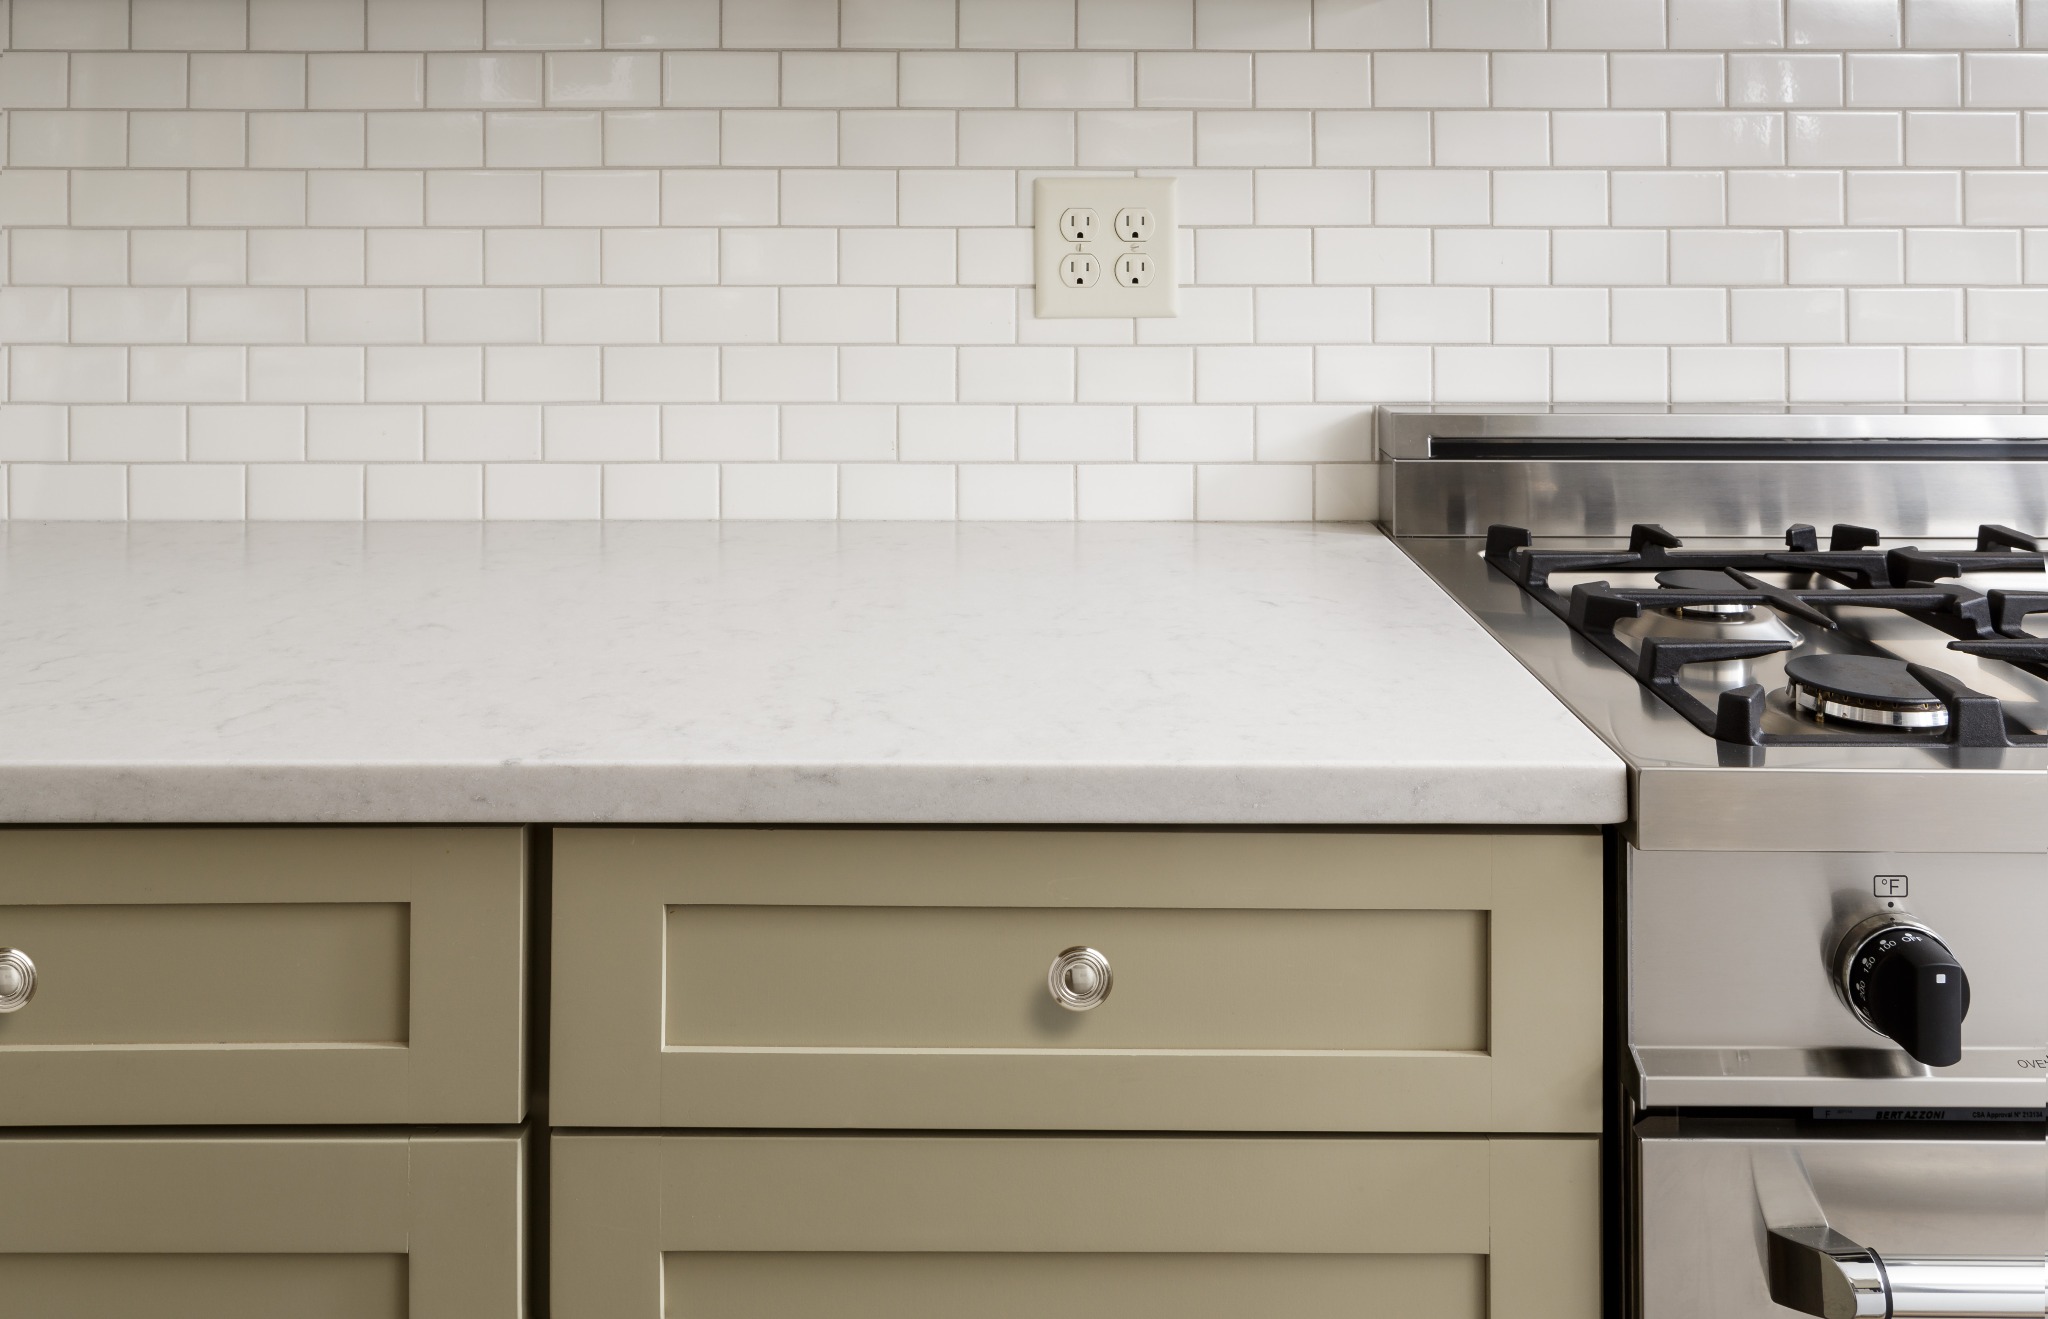 Khaki colored cabinets with white stone counters.